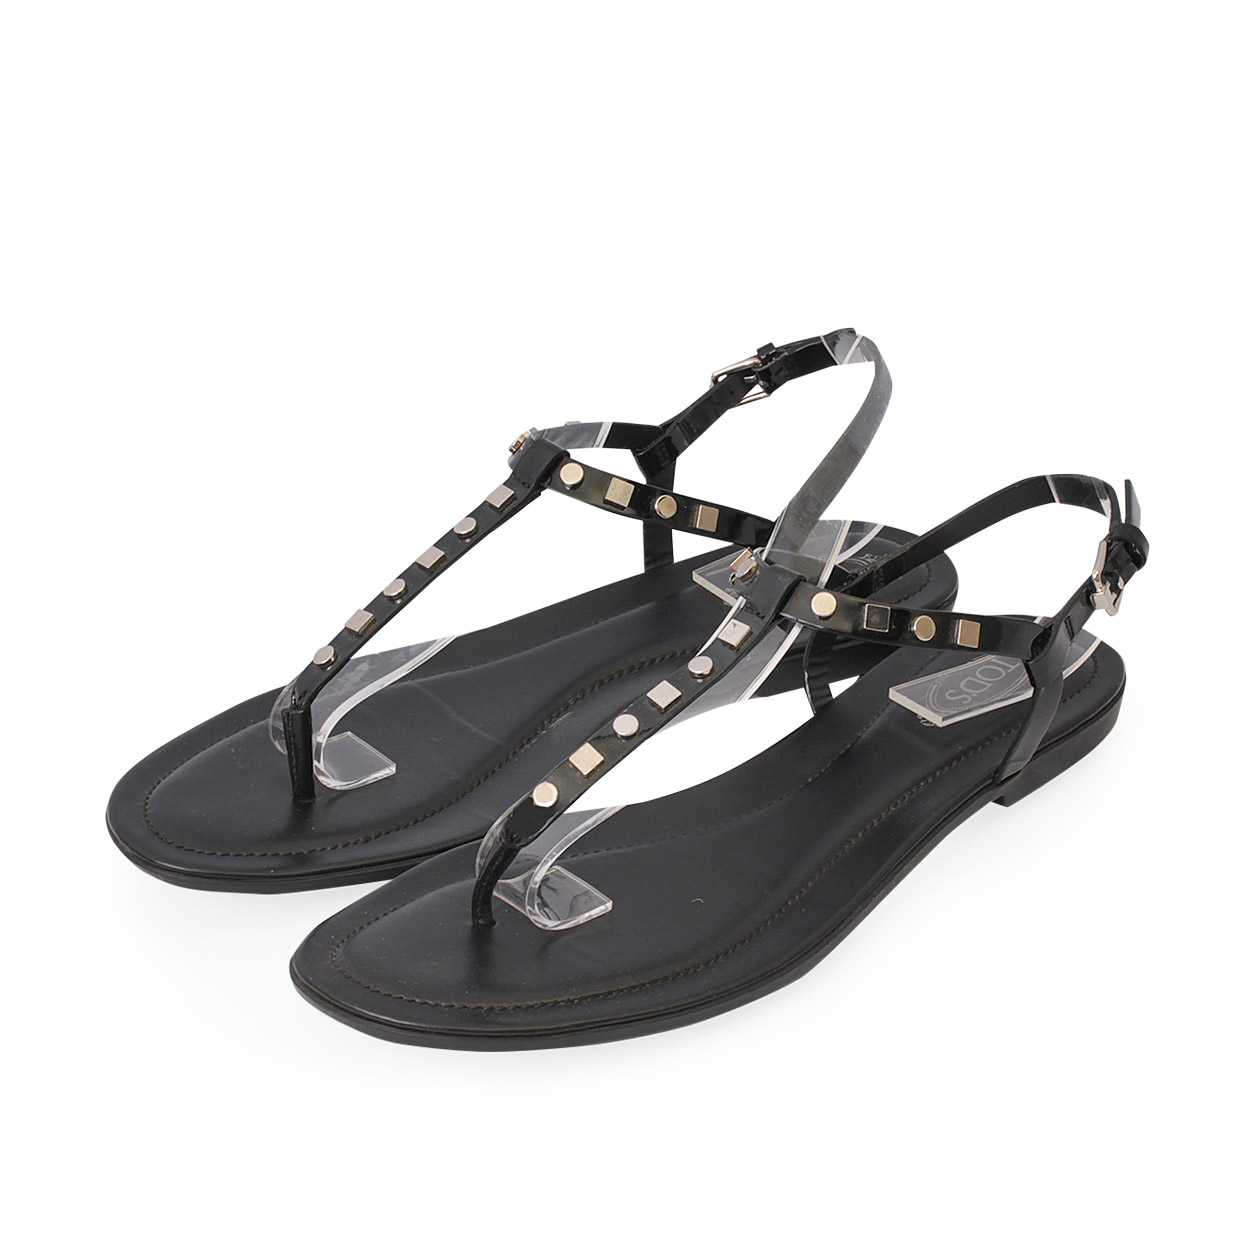 TODS Patent Studded Sandals Black S 39 6 Angle 